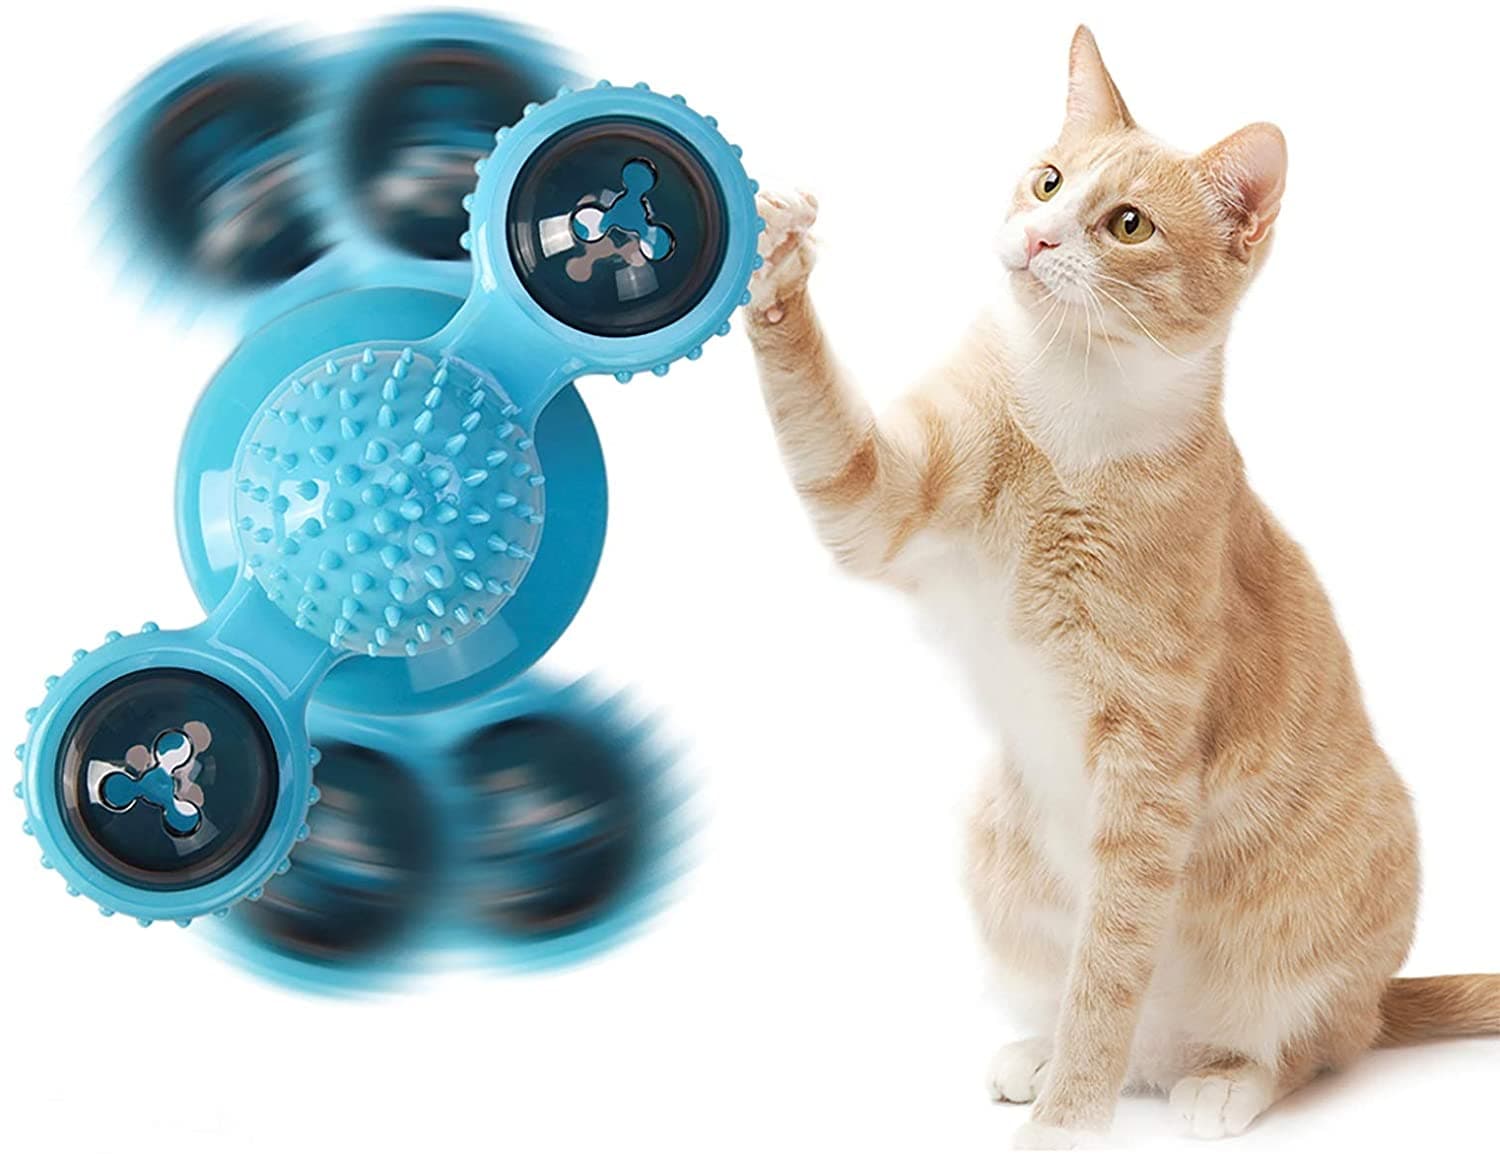 Leaps & Bounds Playmat Kitten Toy